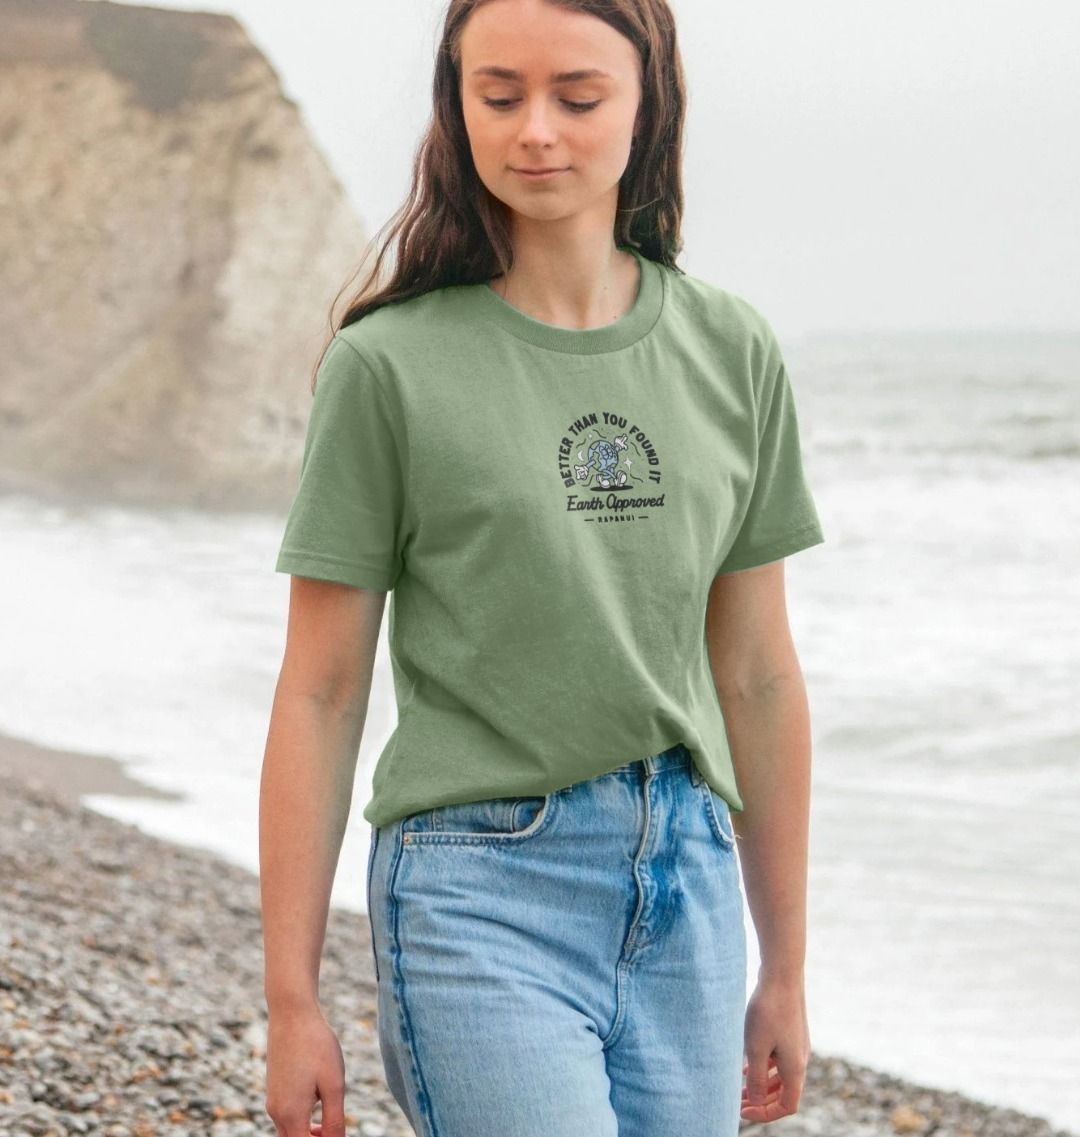 Women's Earth Approved T - Shirt - Printed T - shirt